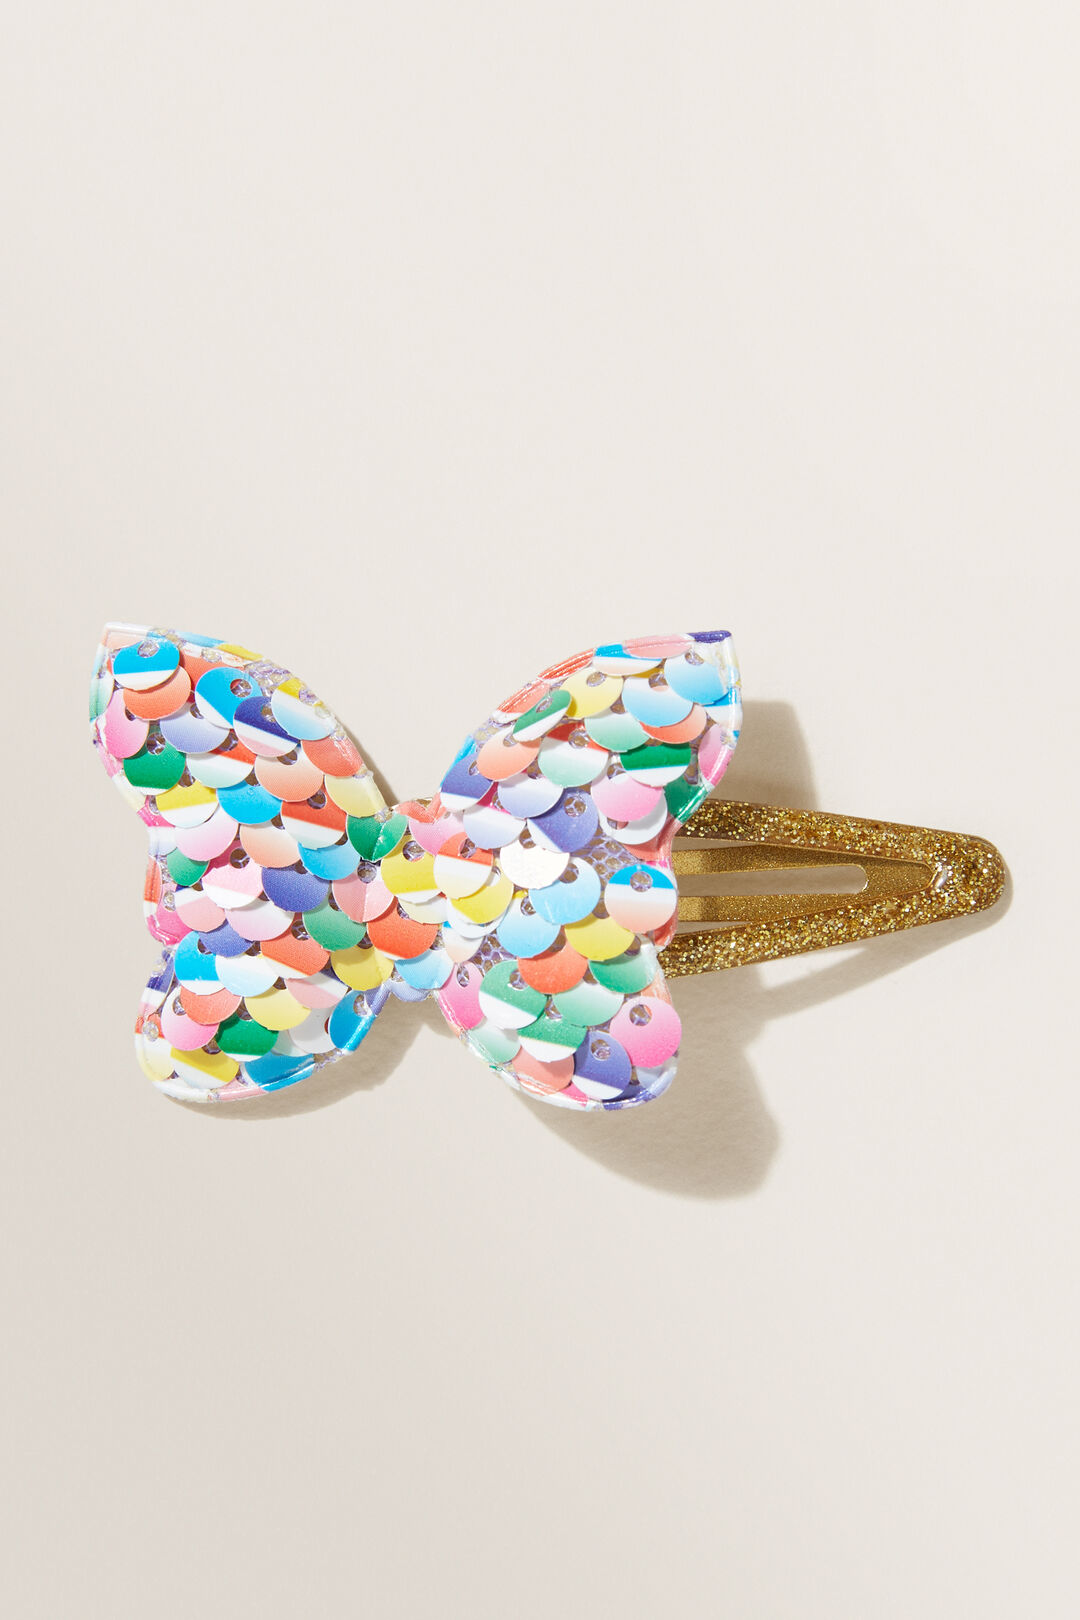 Butterfly Sequin Clip  Multi  hi-res